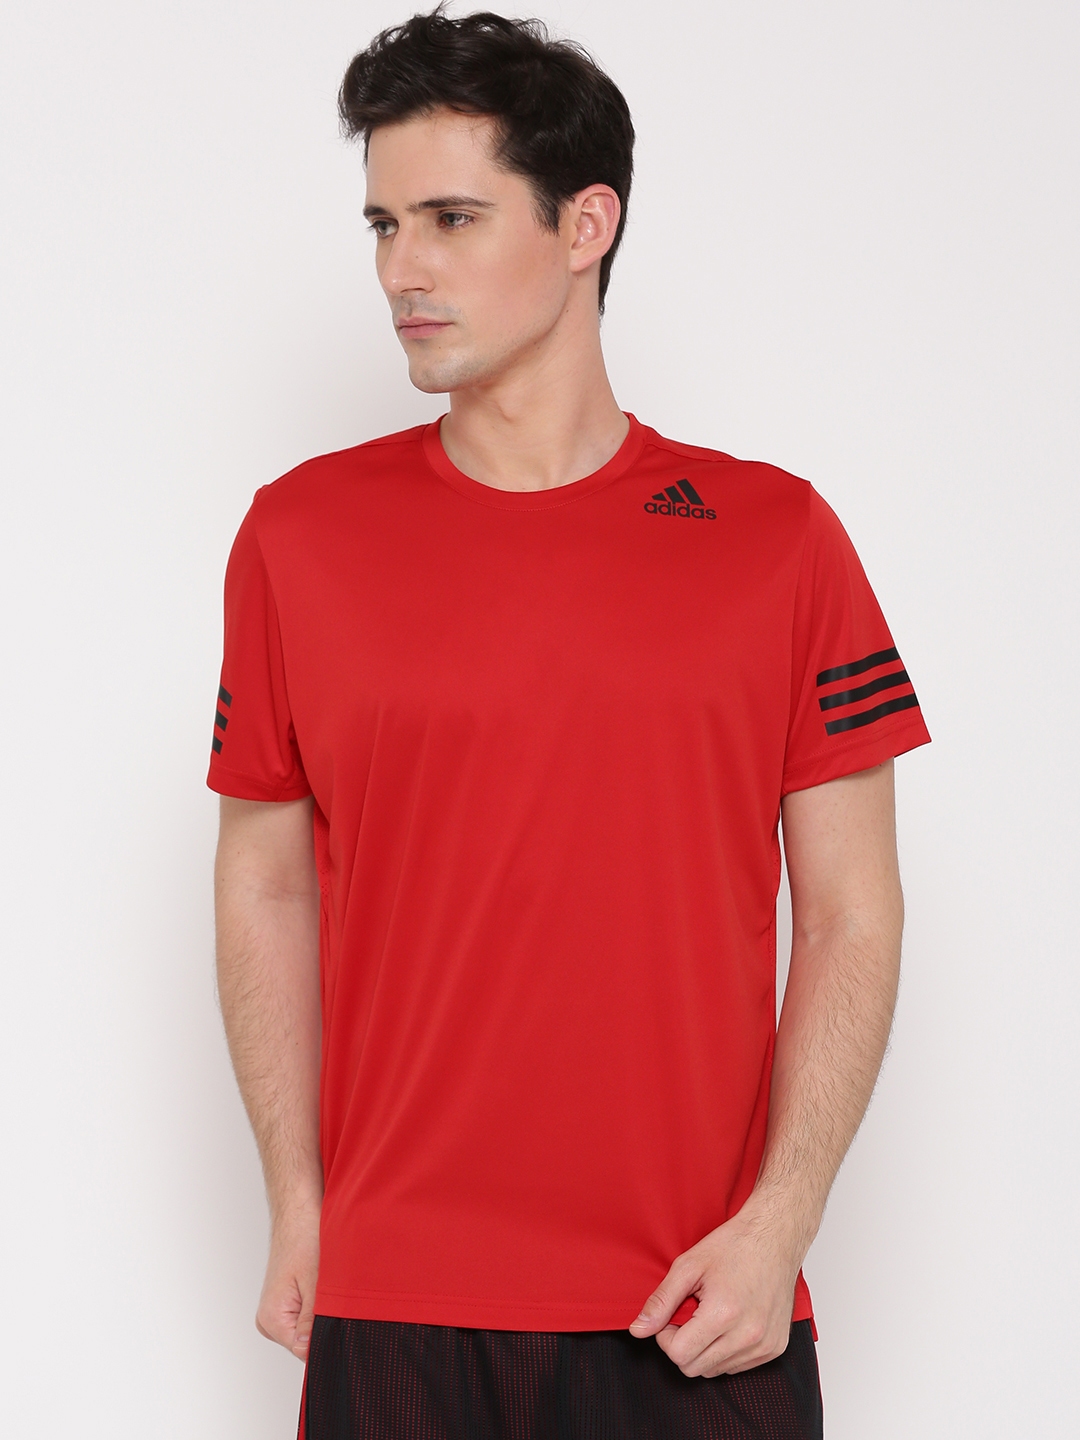 Buy ADIDAS Men Red Climacool Solid Round Neck Training T Shirt ...